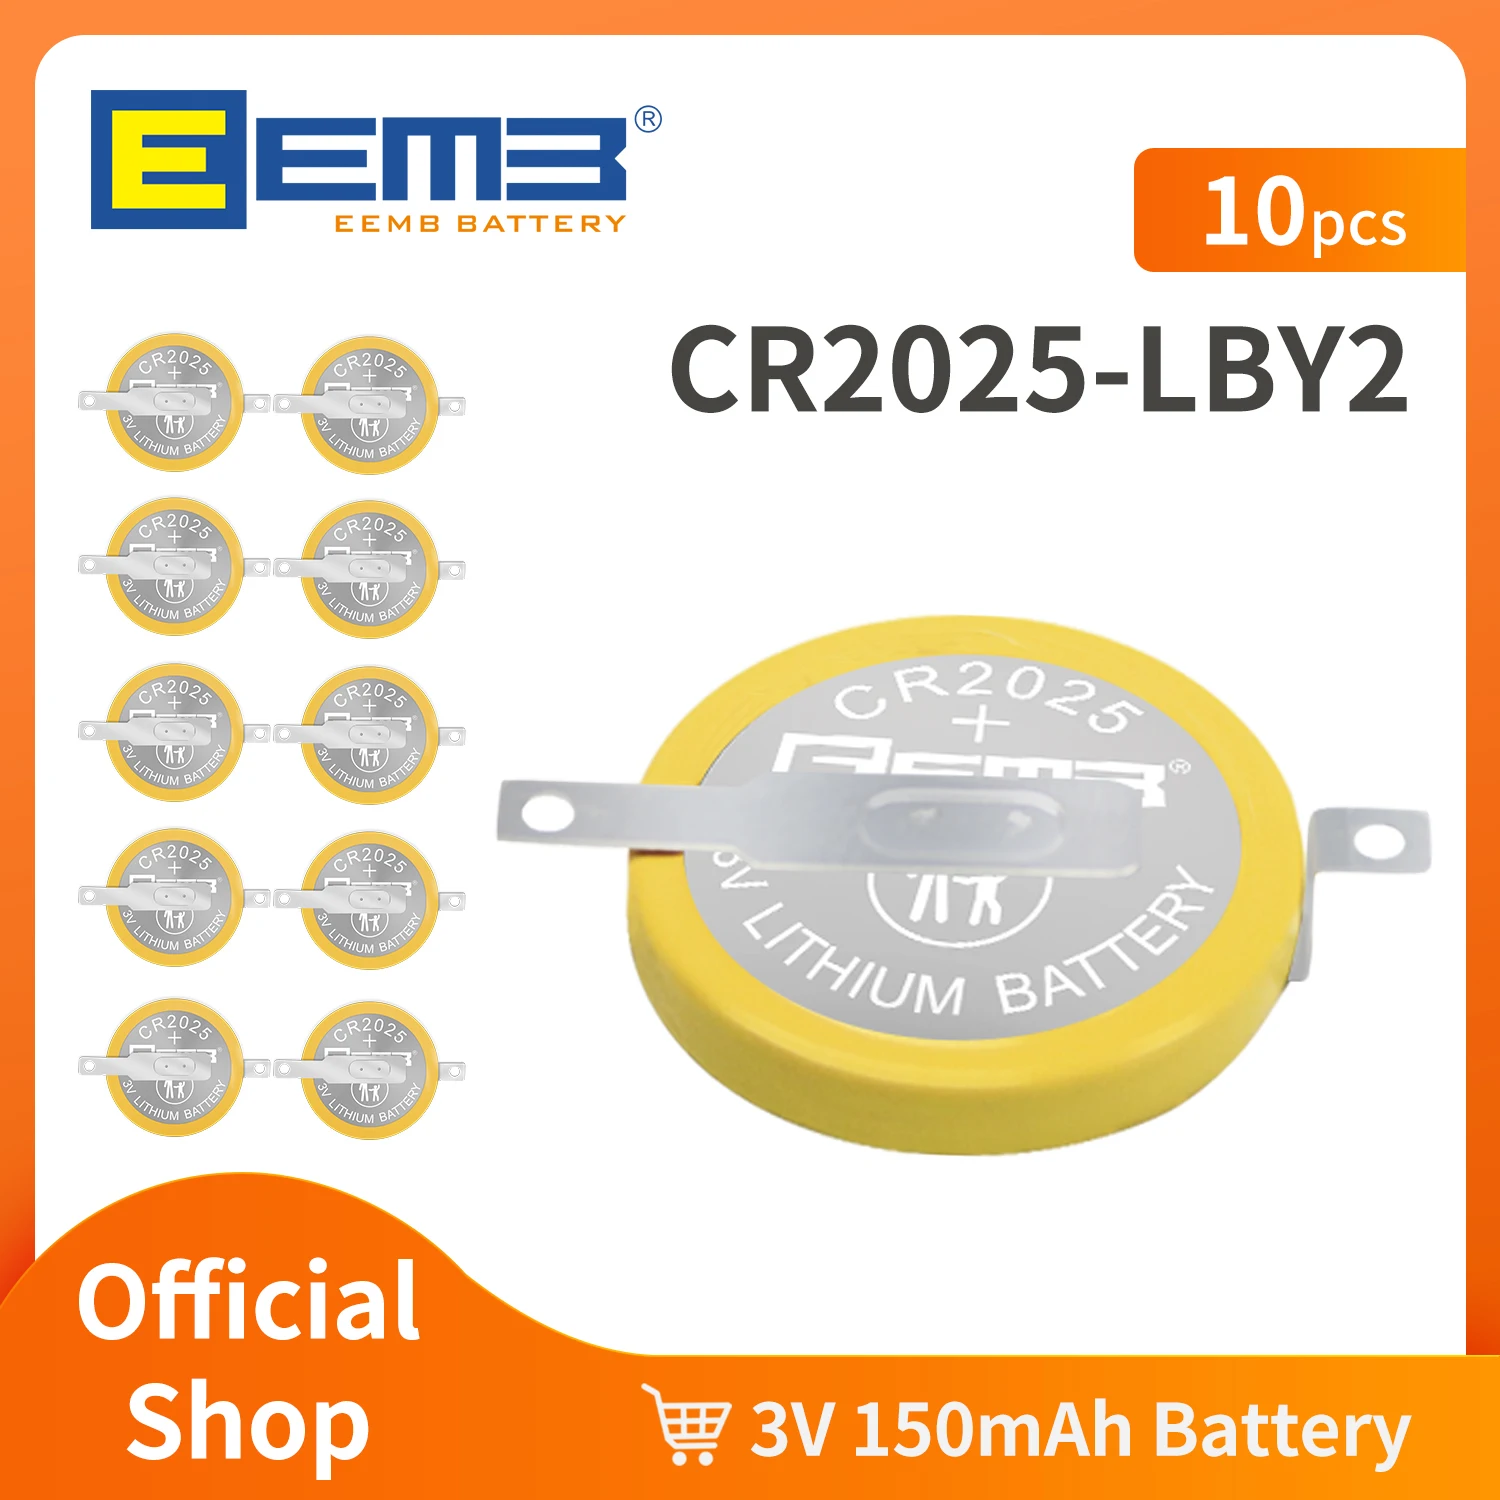 EEMB 10PCS CR2025 Battery With LBY2 Solder Tabs CR2025 Tabbed Battery Compatible with Gameboy Color Gameboy Advance game box